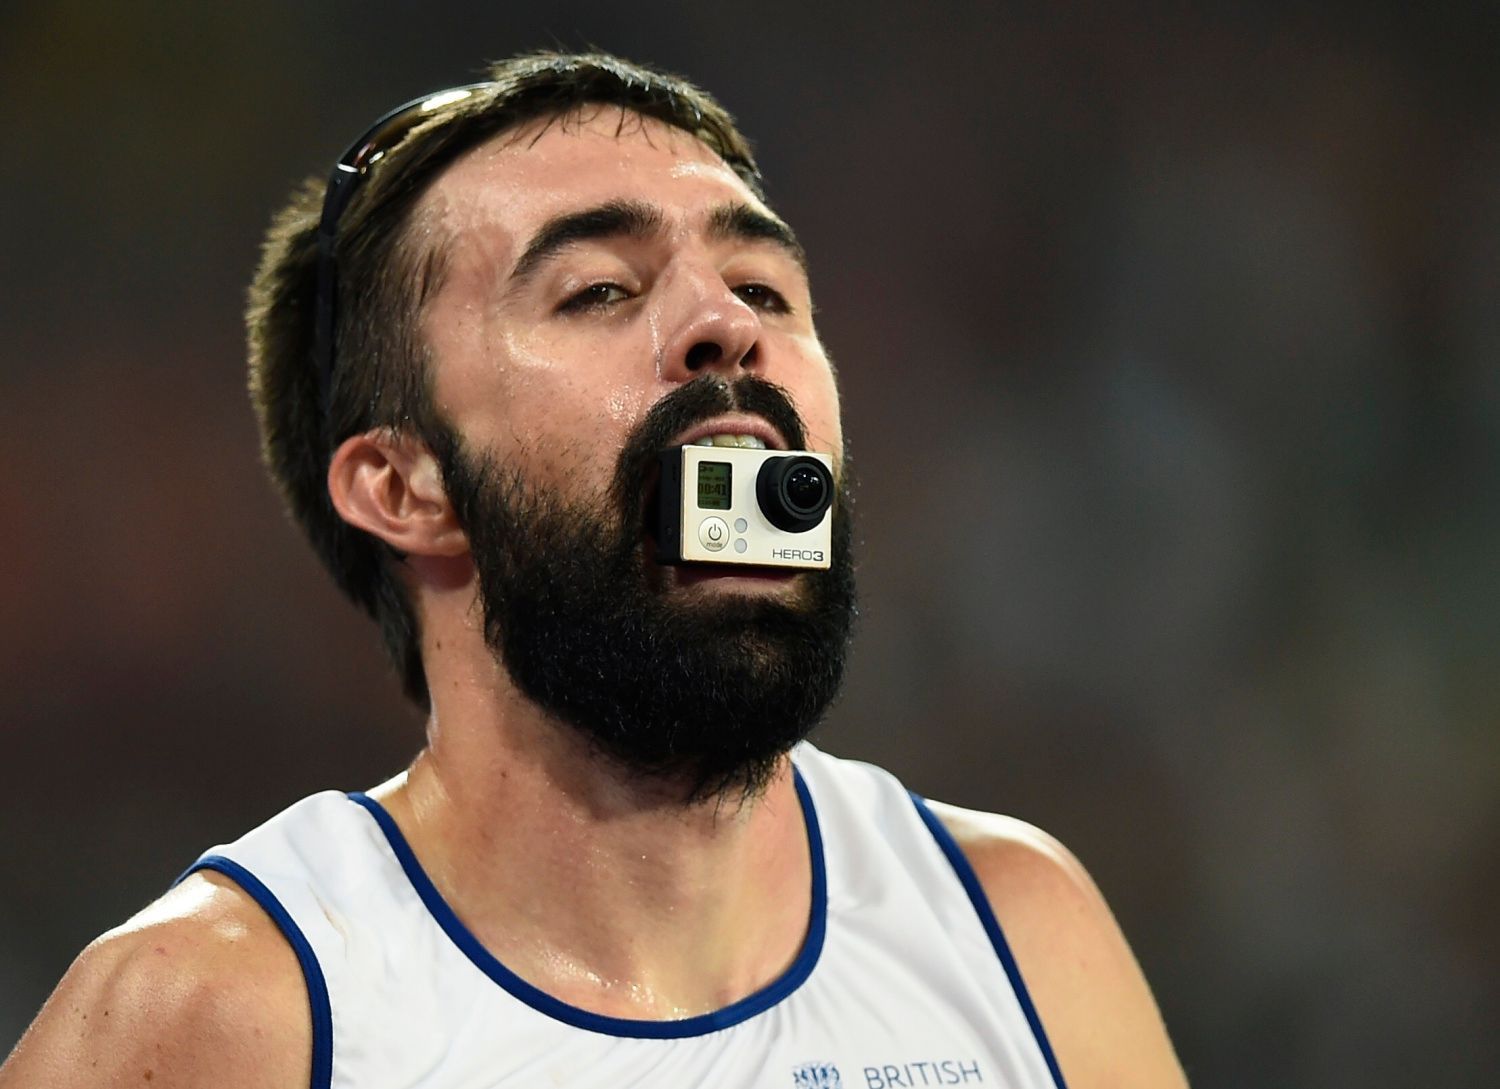 MS v atletice 2015: Martyn Rooney, 4x400 m